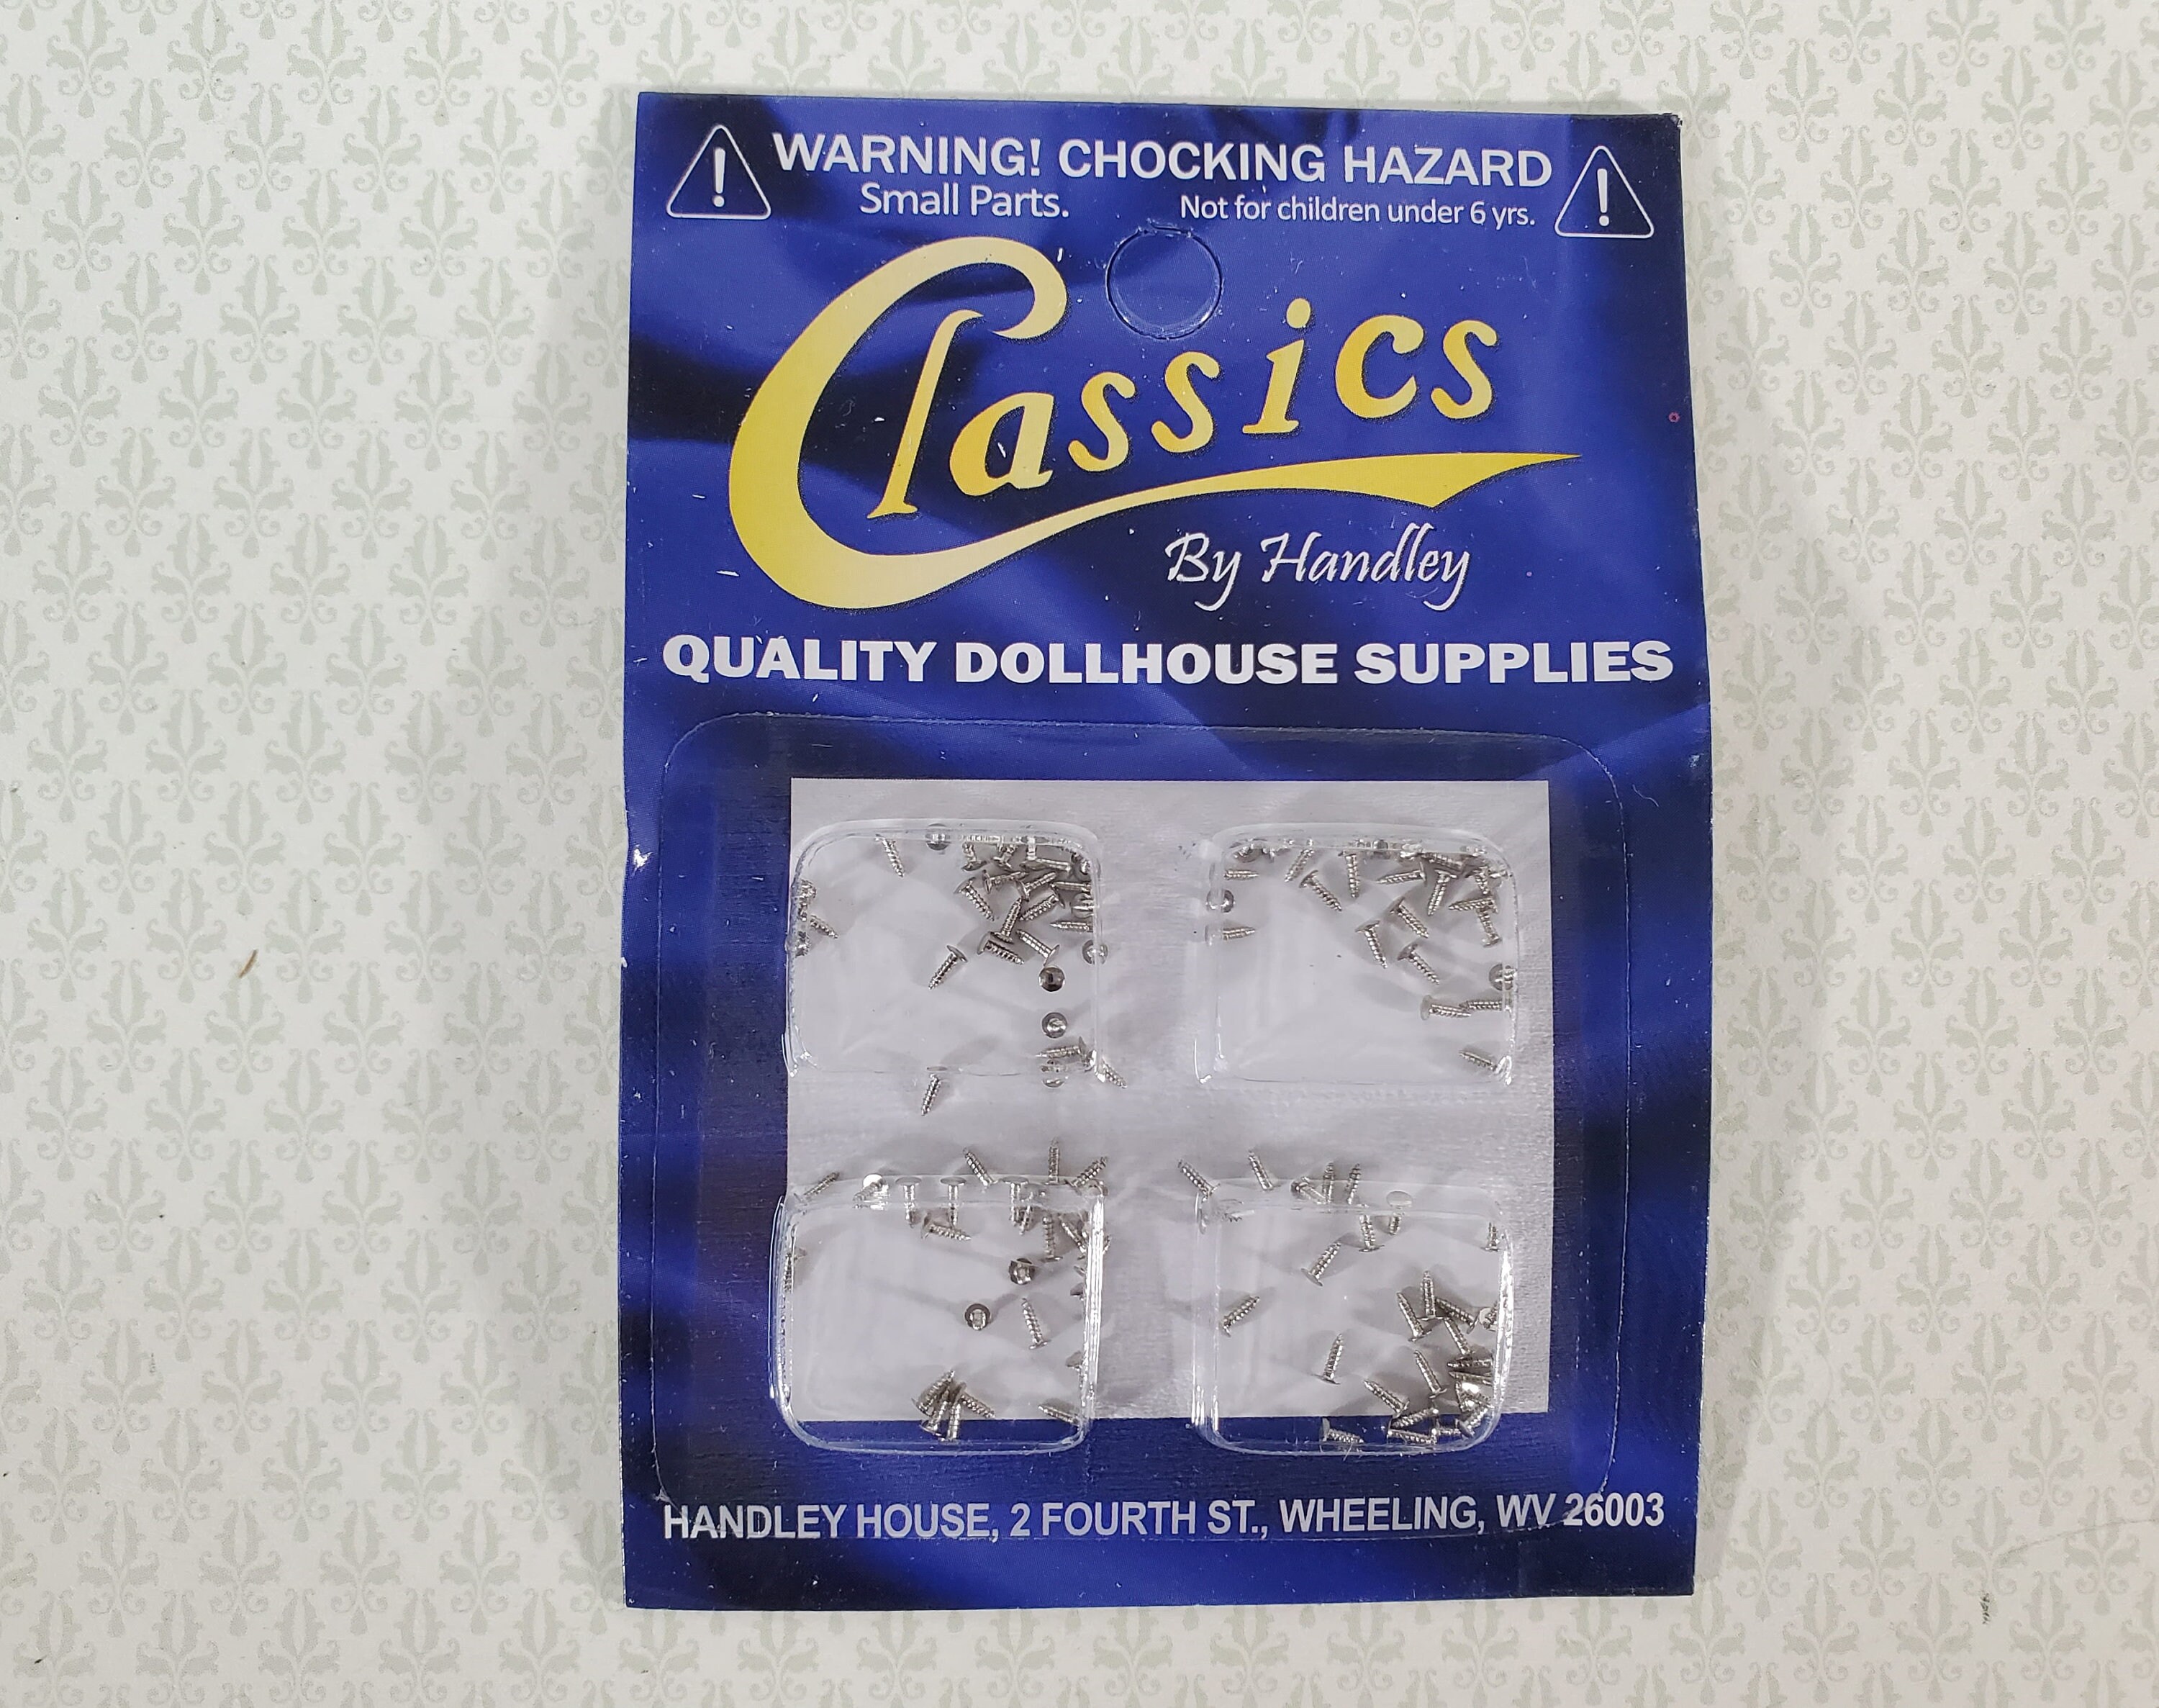 Dollhouse Miniature Wallpaper Paste Mucilage Water Soluble 4 Oz 